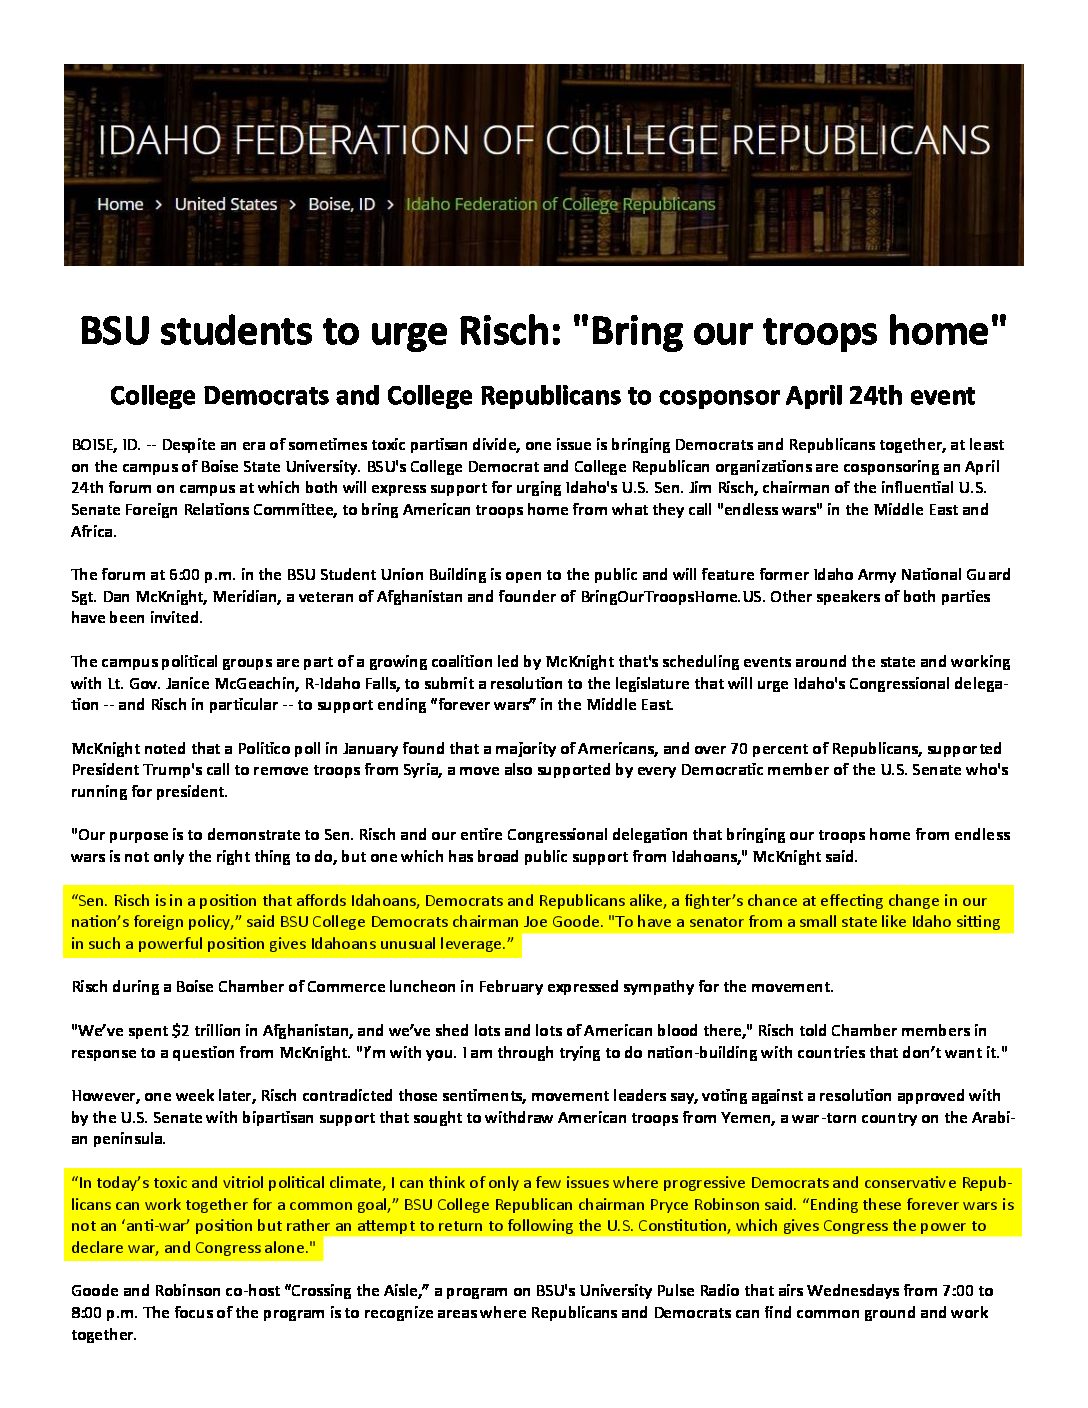 College Republicans – BSU students to urge Risch _Bring our troops home_